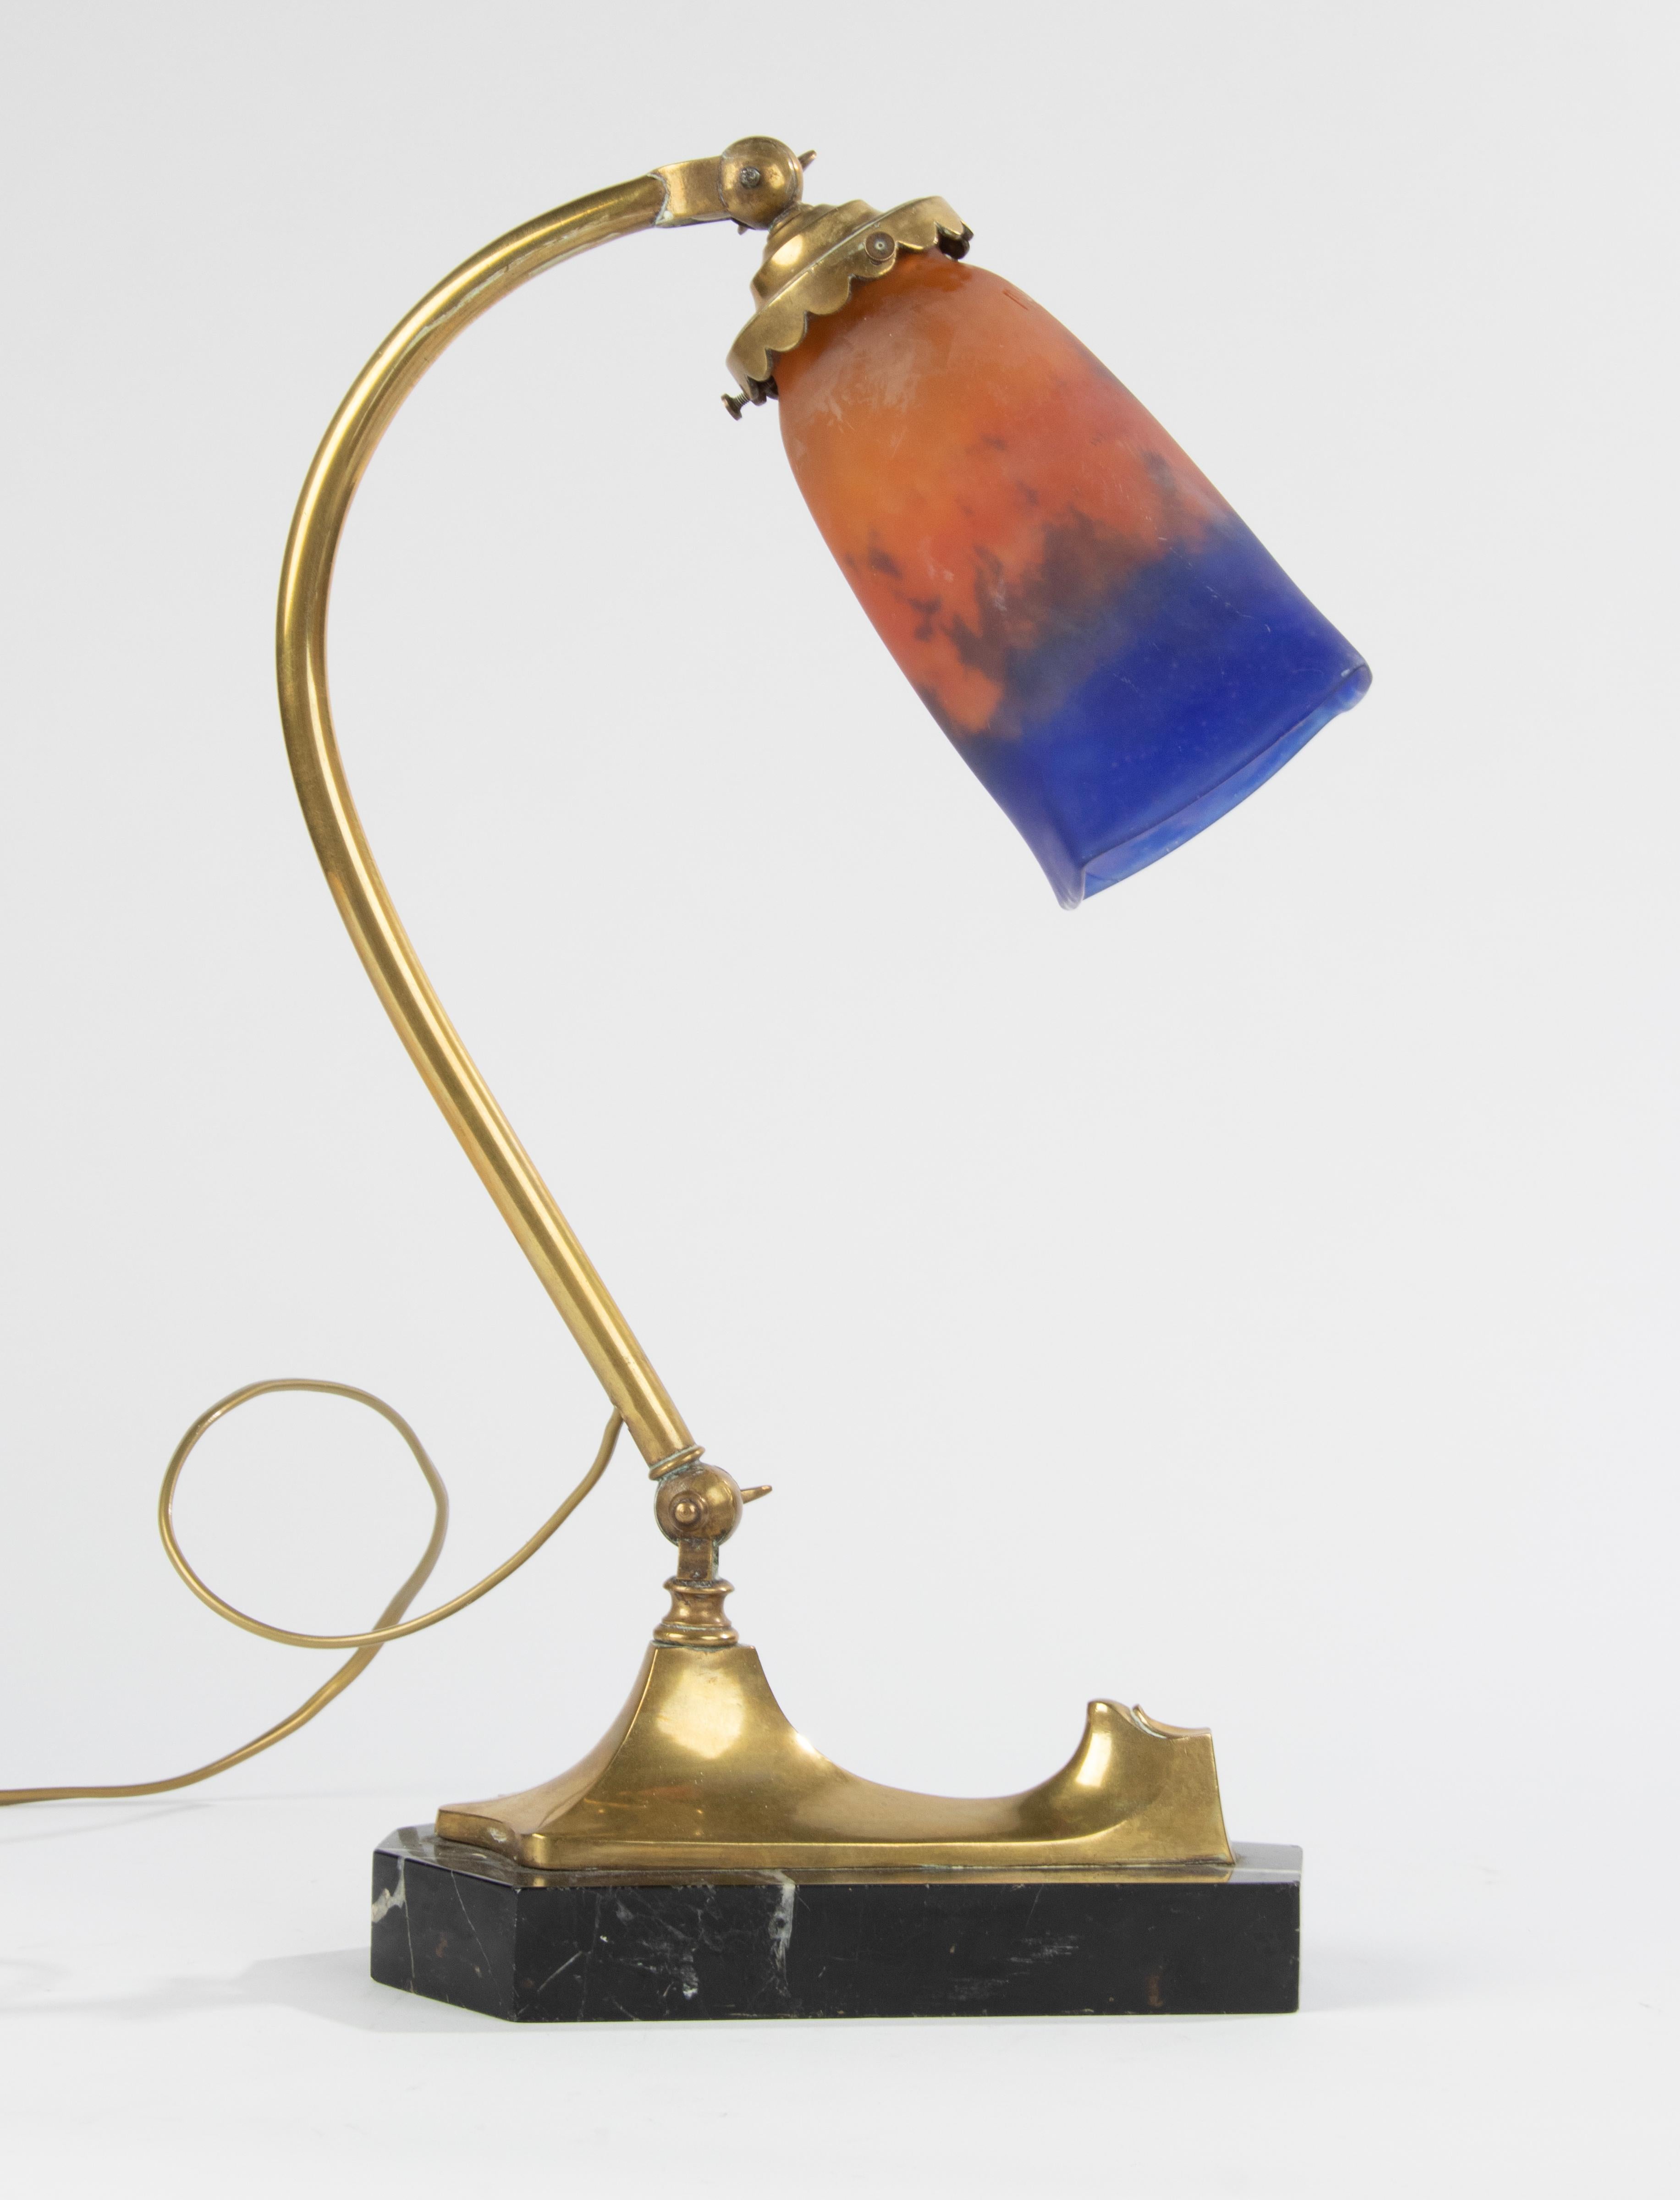 Early 20th Century Art Nouveau Brass Desk Table Lamp, Muller Freres Paste Glass For Sale 6